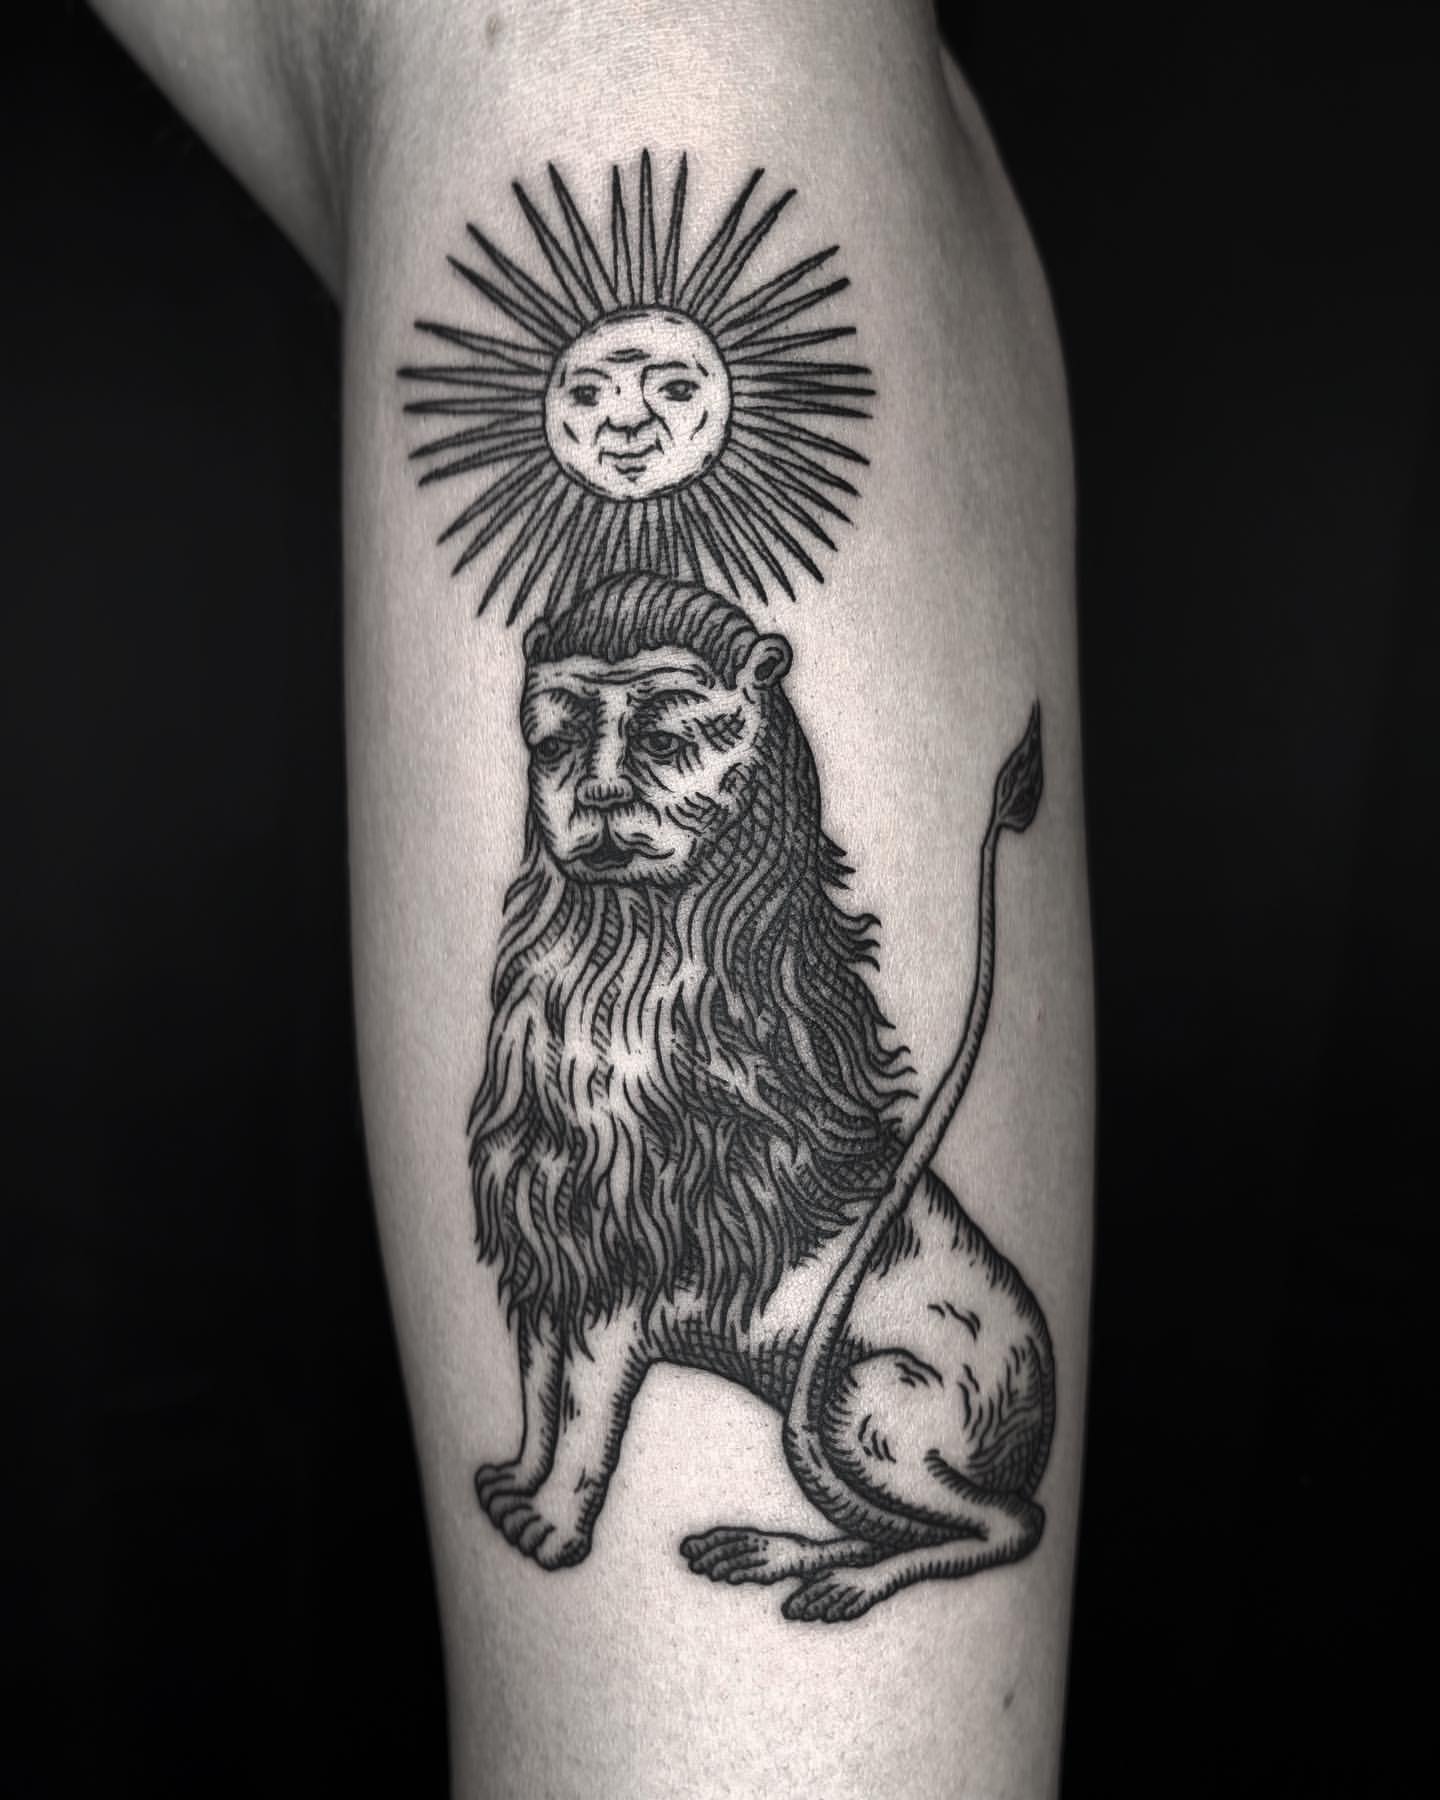 AIGC - image of a lion and sun tattoo, with the lion's he - Hayo AI tools